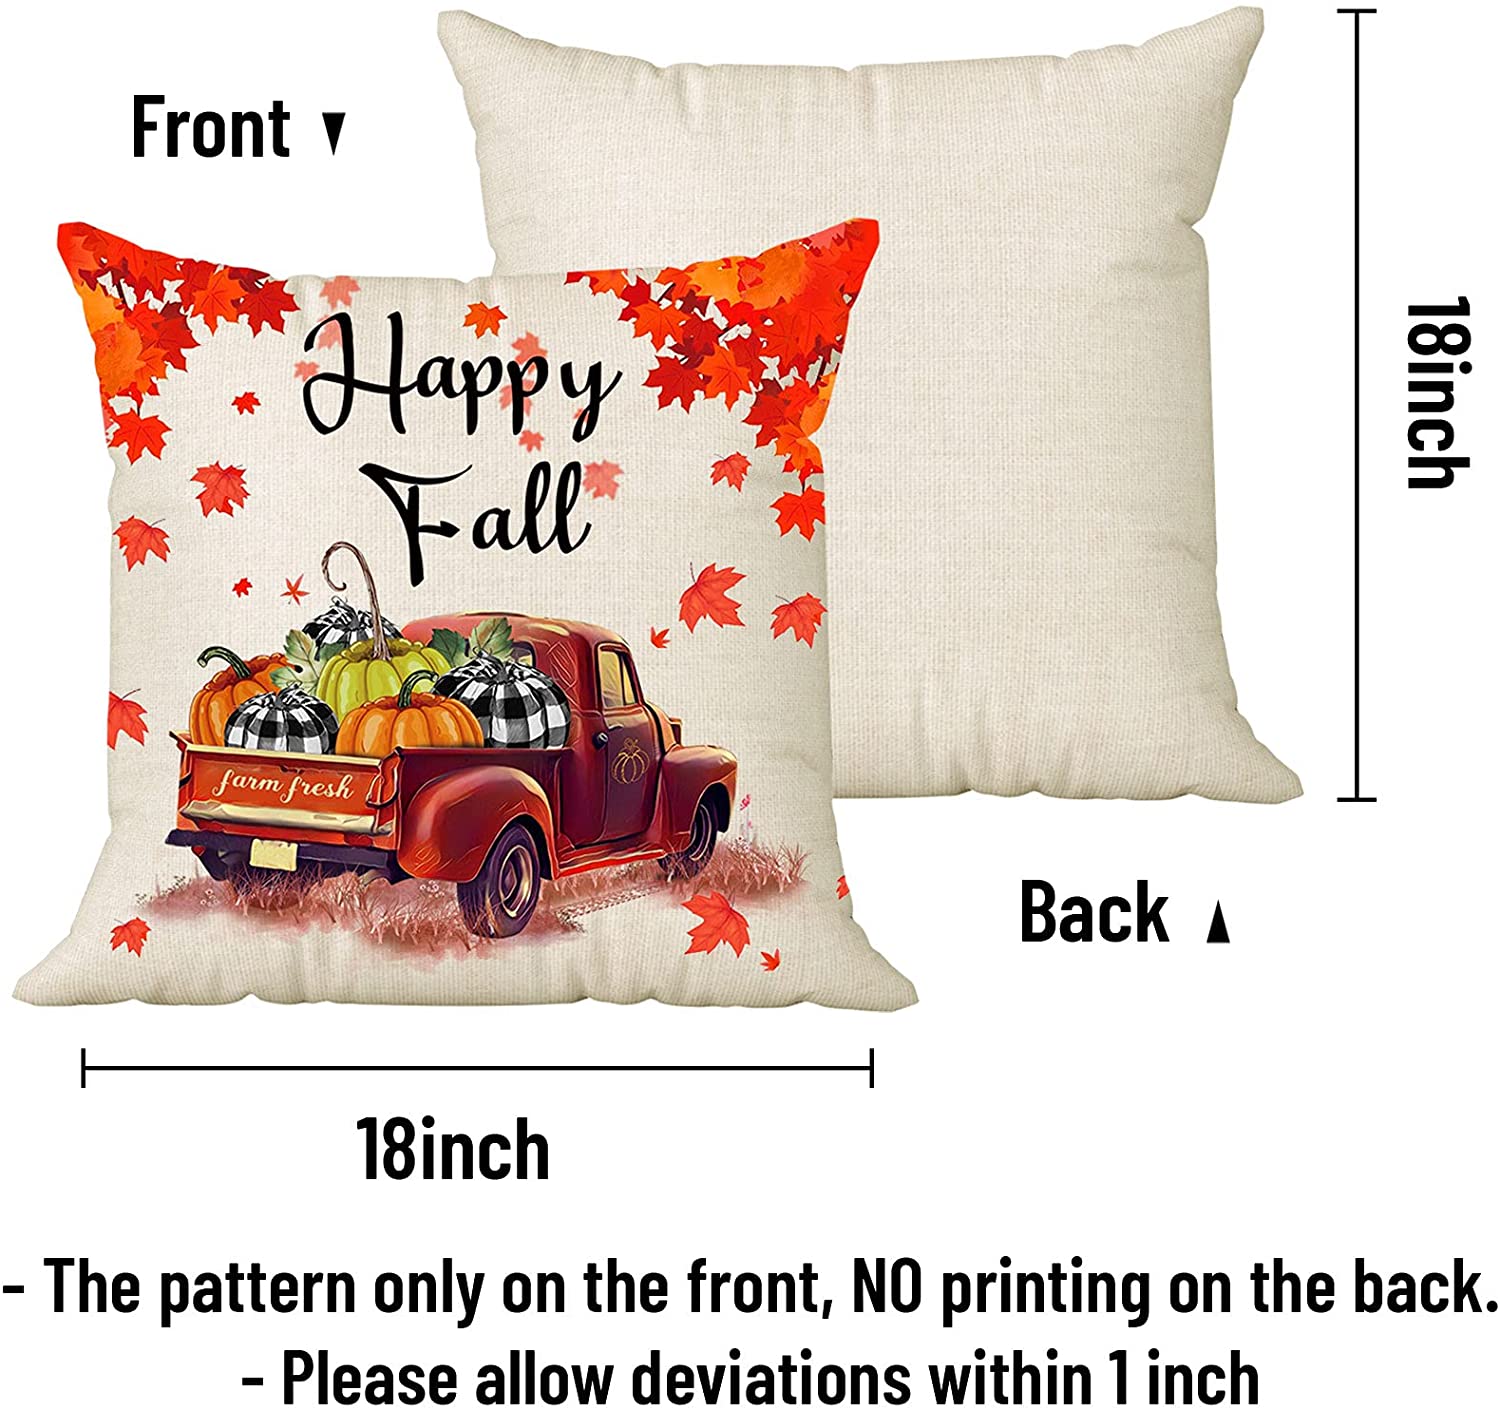 4 Pcs Happy Harvest Decorative Pillow Covers 18 x 18 (Truck, Bicycle)